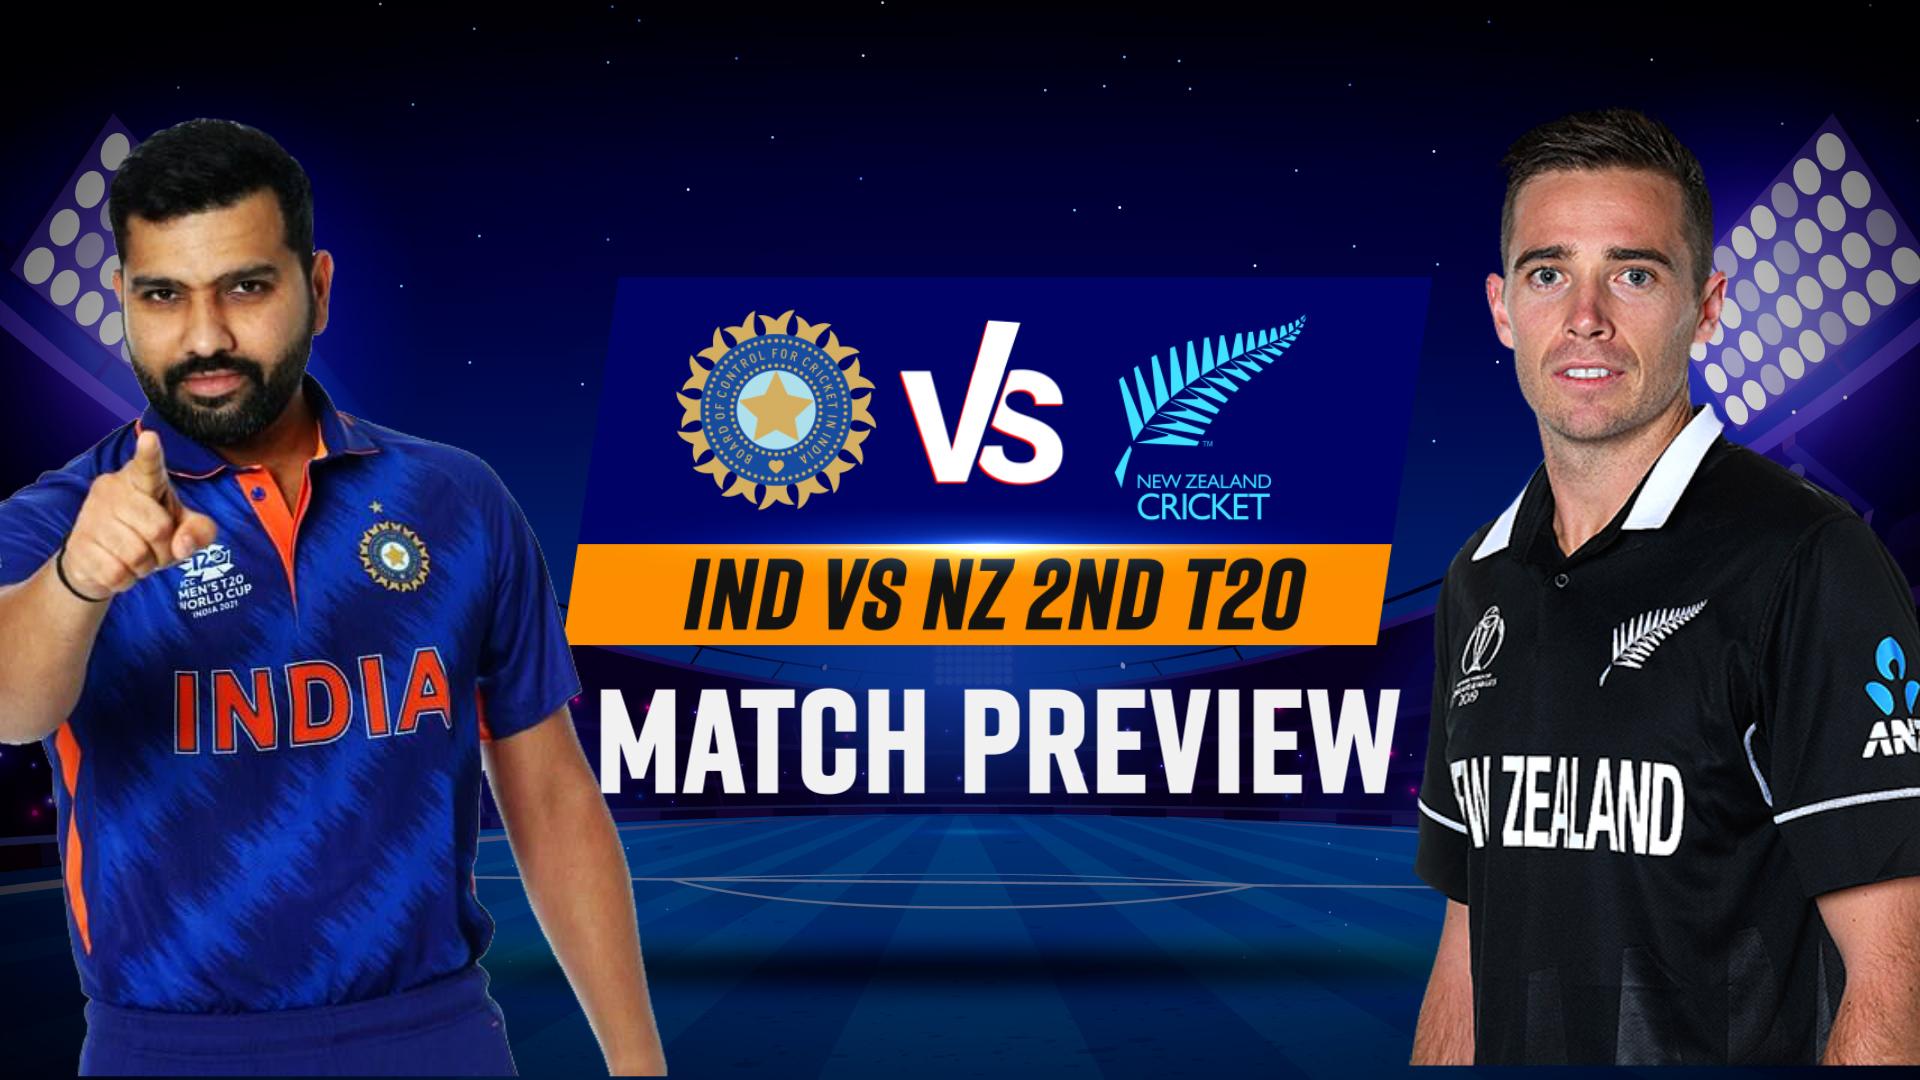 Ind vs NZ T20 Match Preview Video India and New Zealand Predicted Playing 11, Ranchi Stadium Pitch Report, Ranchi Weather Forecast